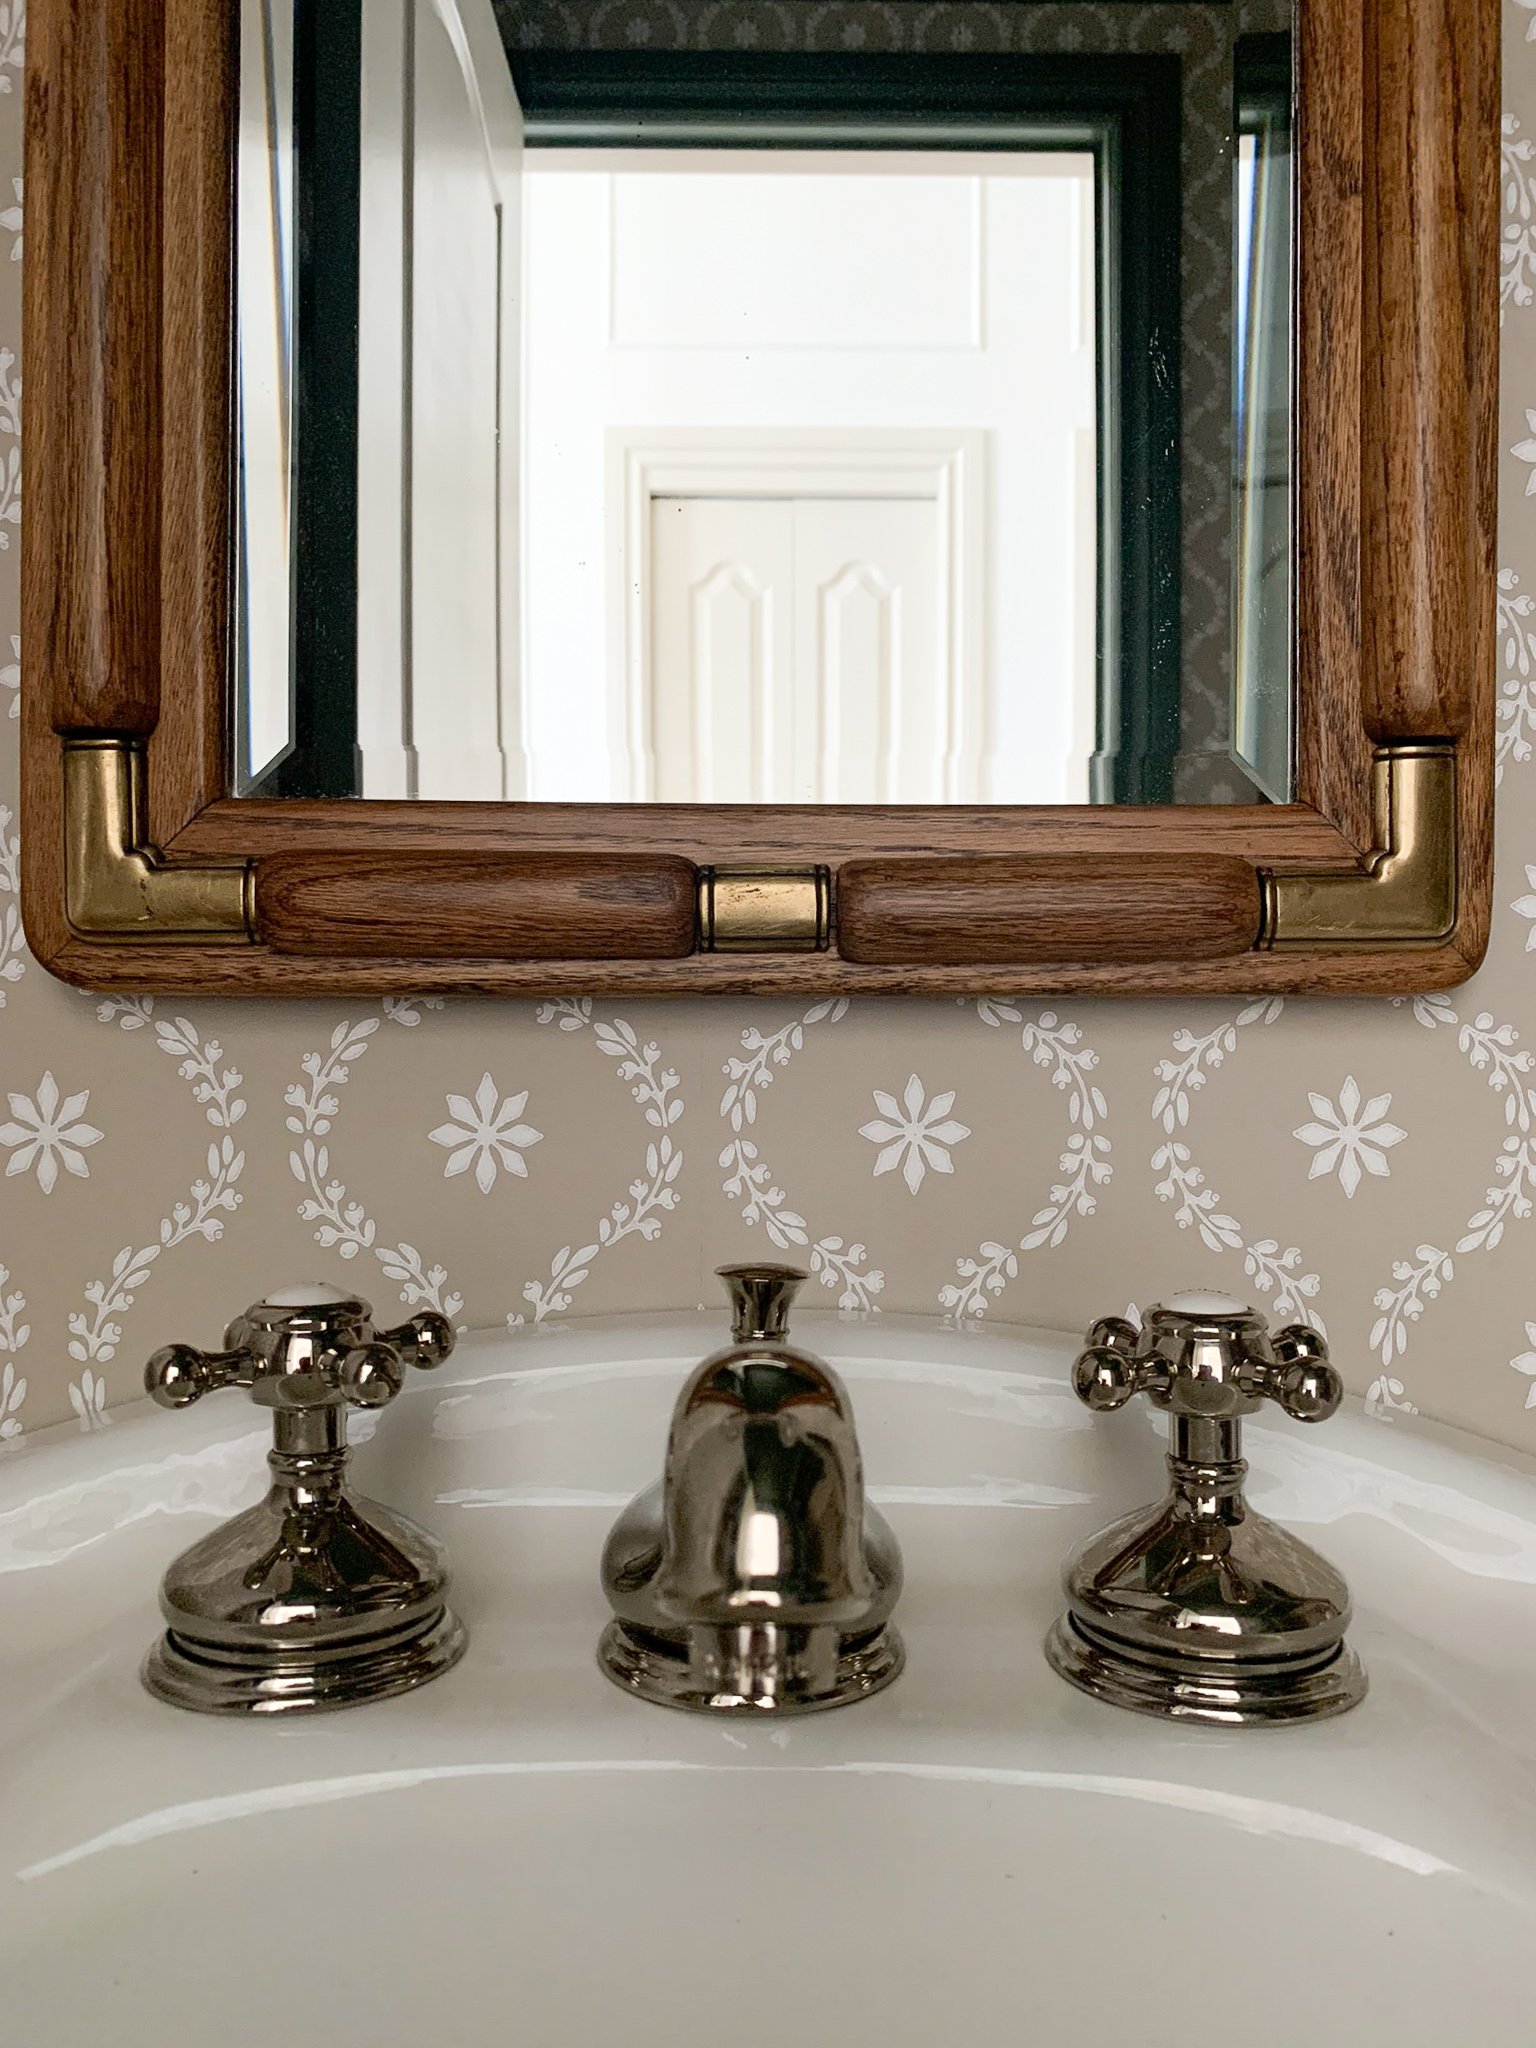 vintage wood and brass mirror over a pedestal sink with polished nickel fixtures